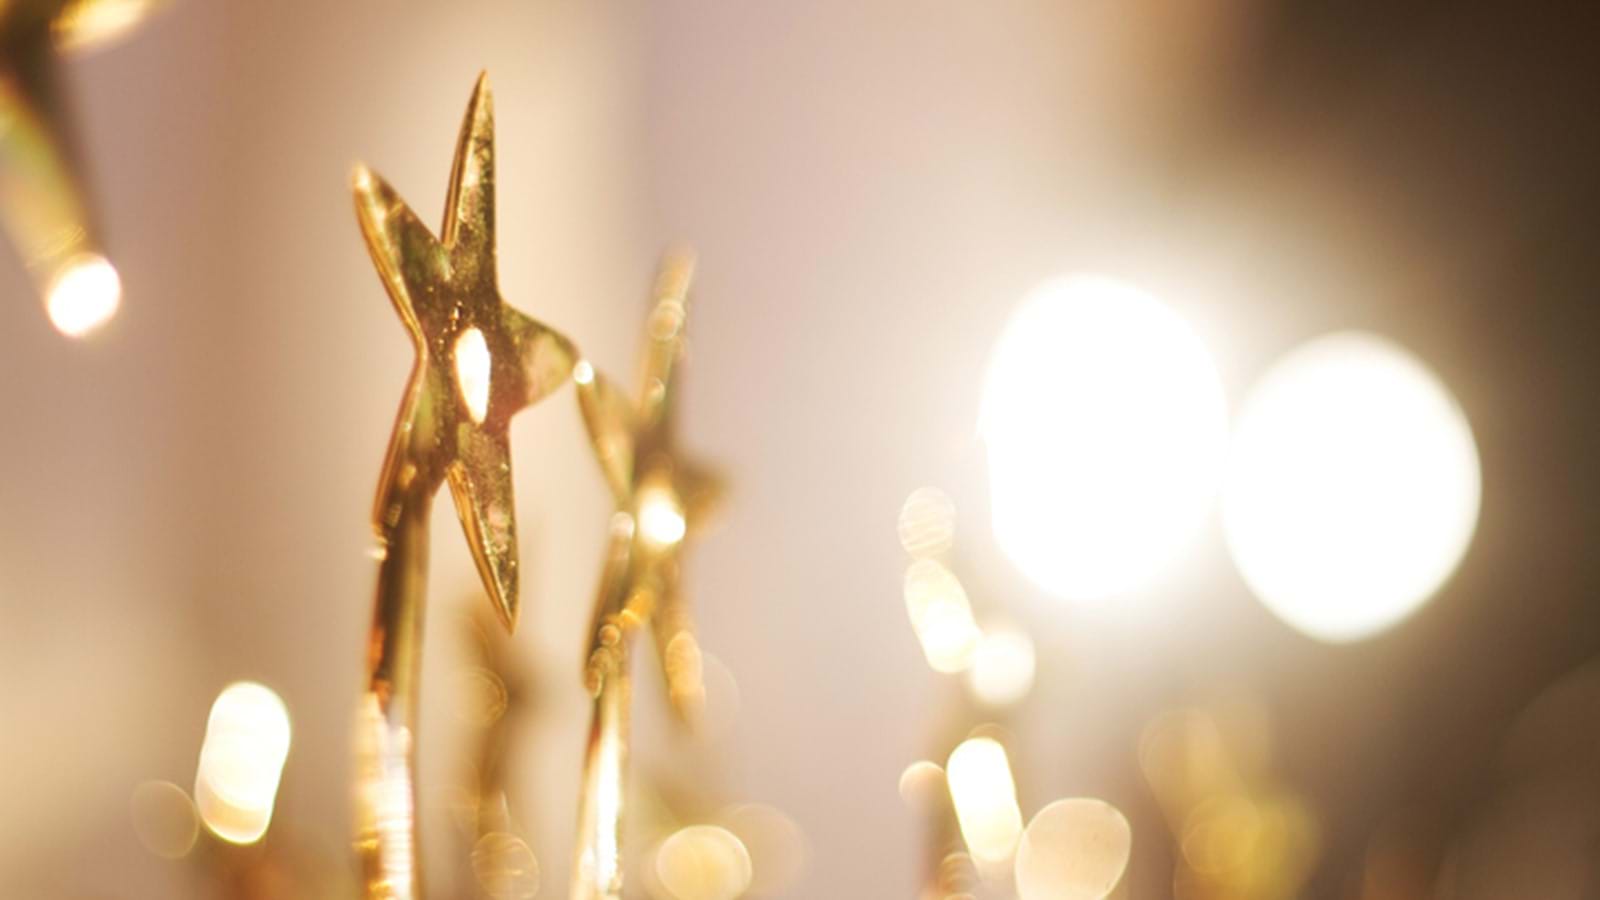 Star trophies for the top Unily intranet content